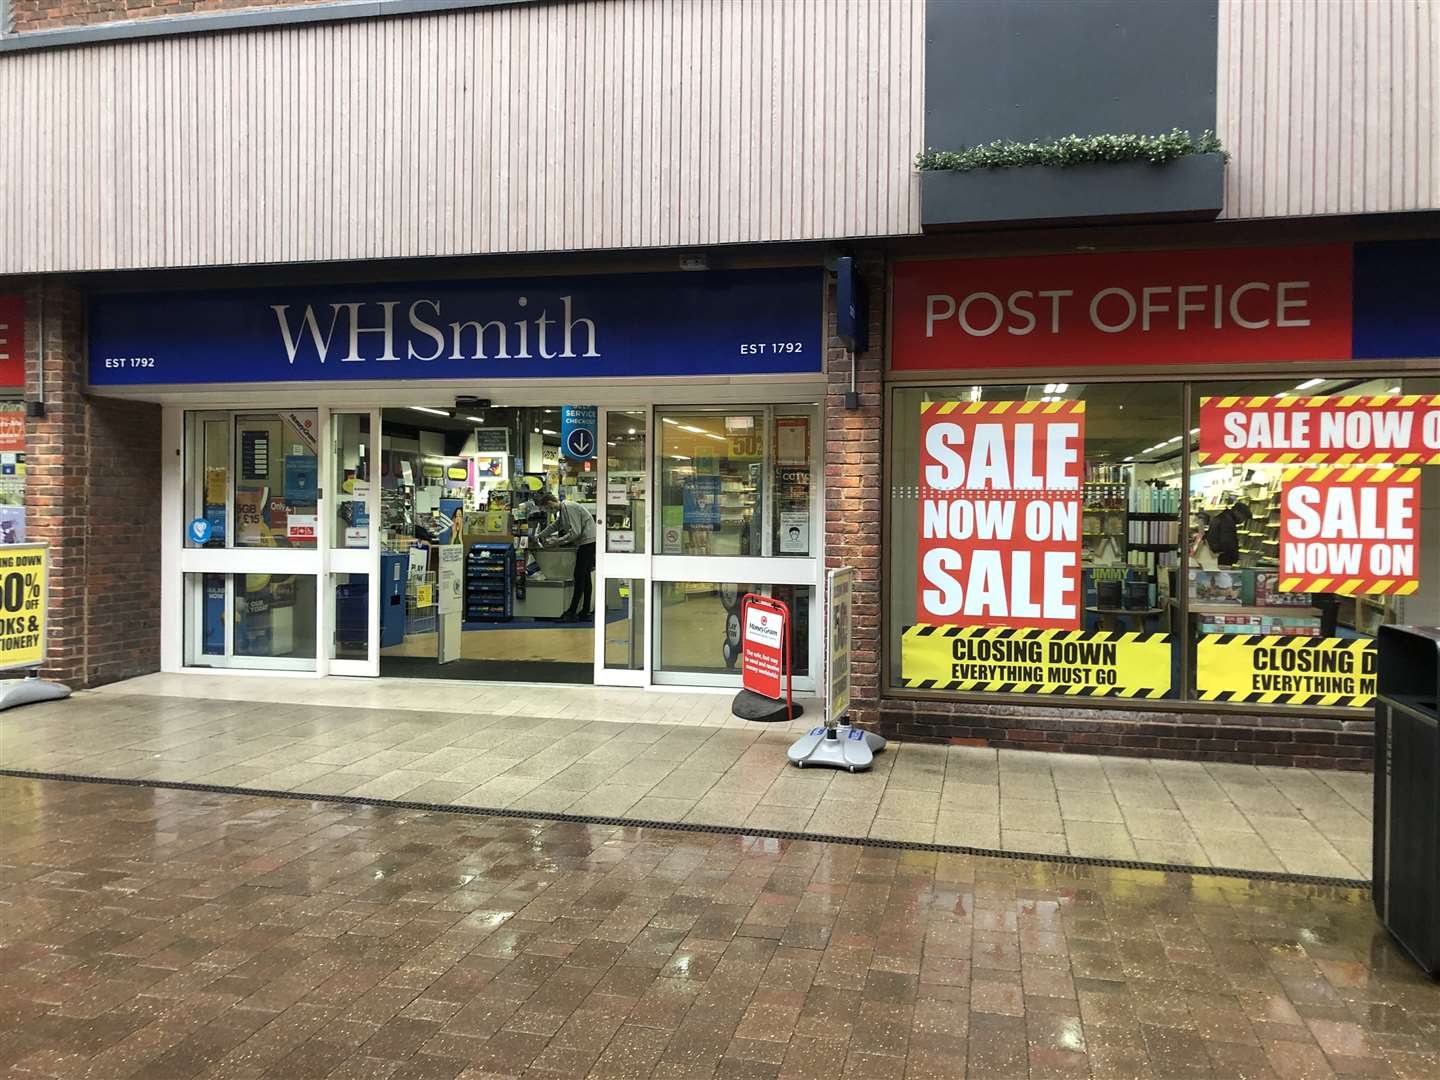 The shop had to close after WHSmith shut